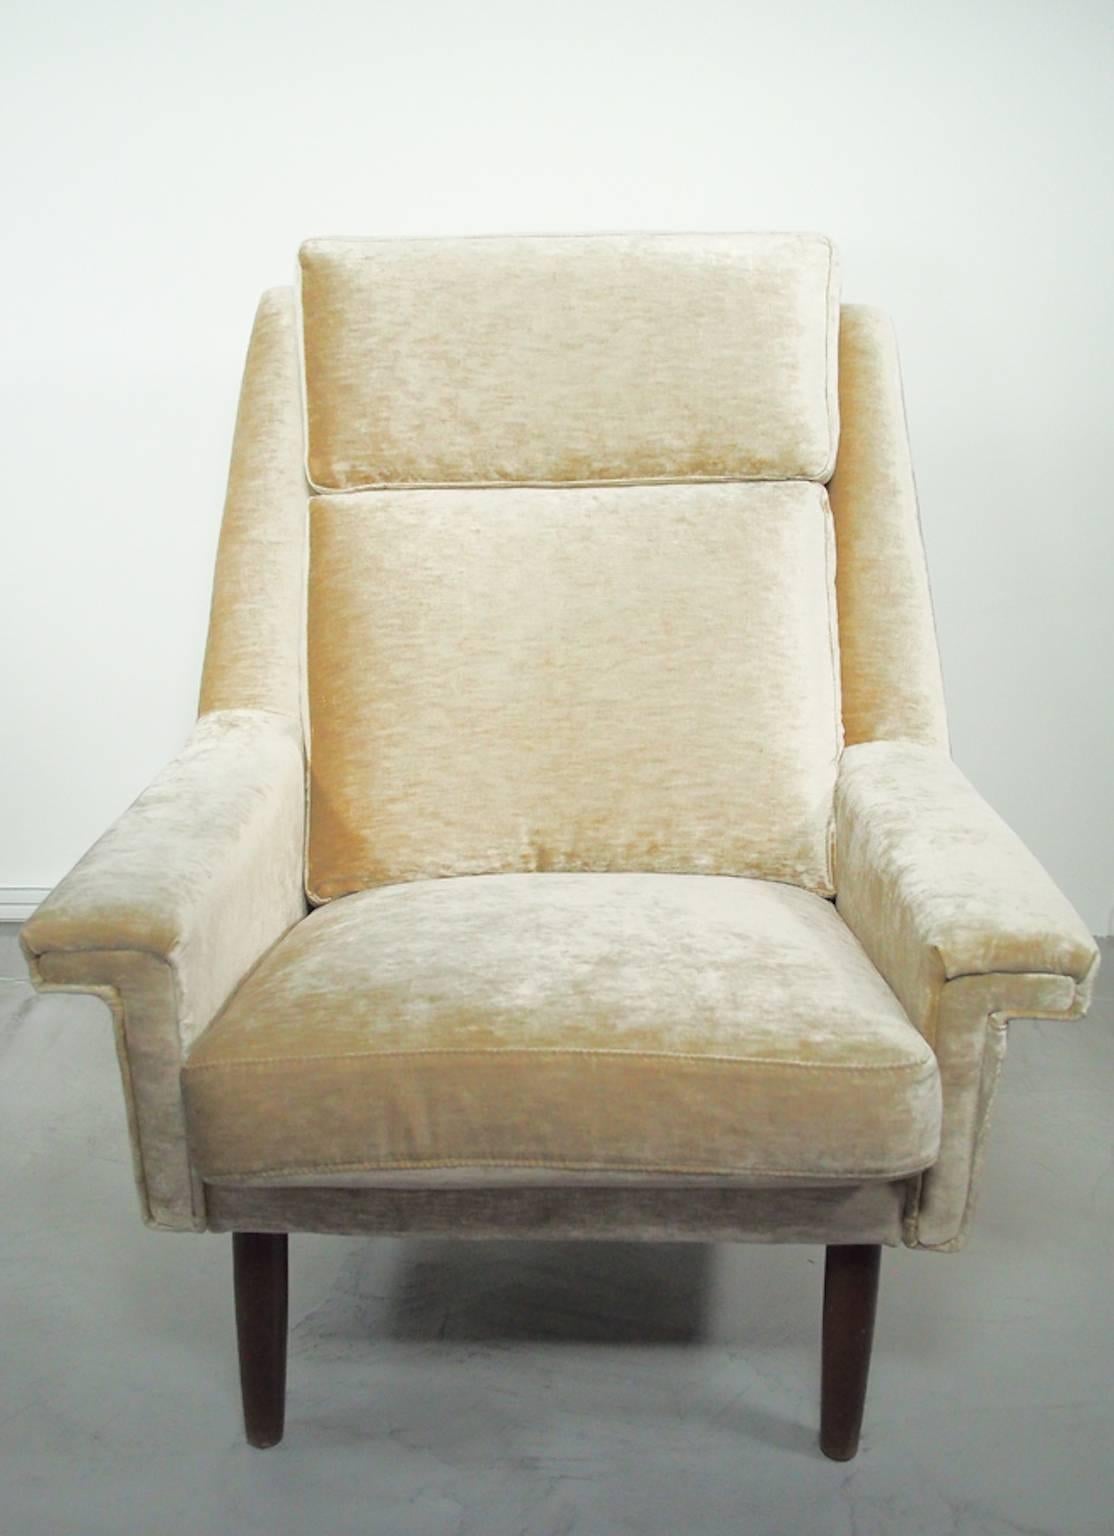 Danish 1950s lounge chair reupholstered in light beige velvet. Round stained wood legs. Very comfortable seat.